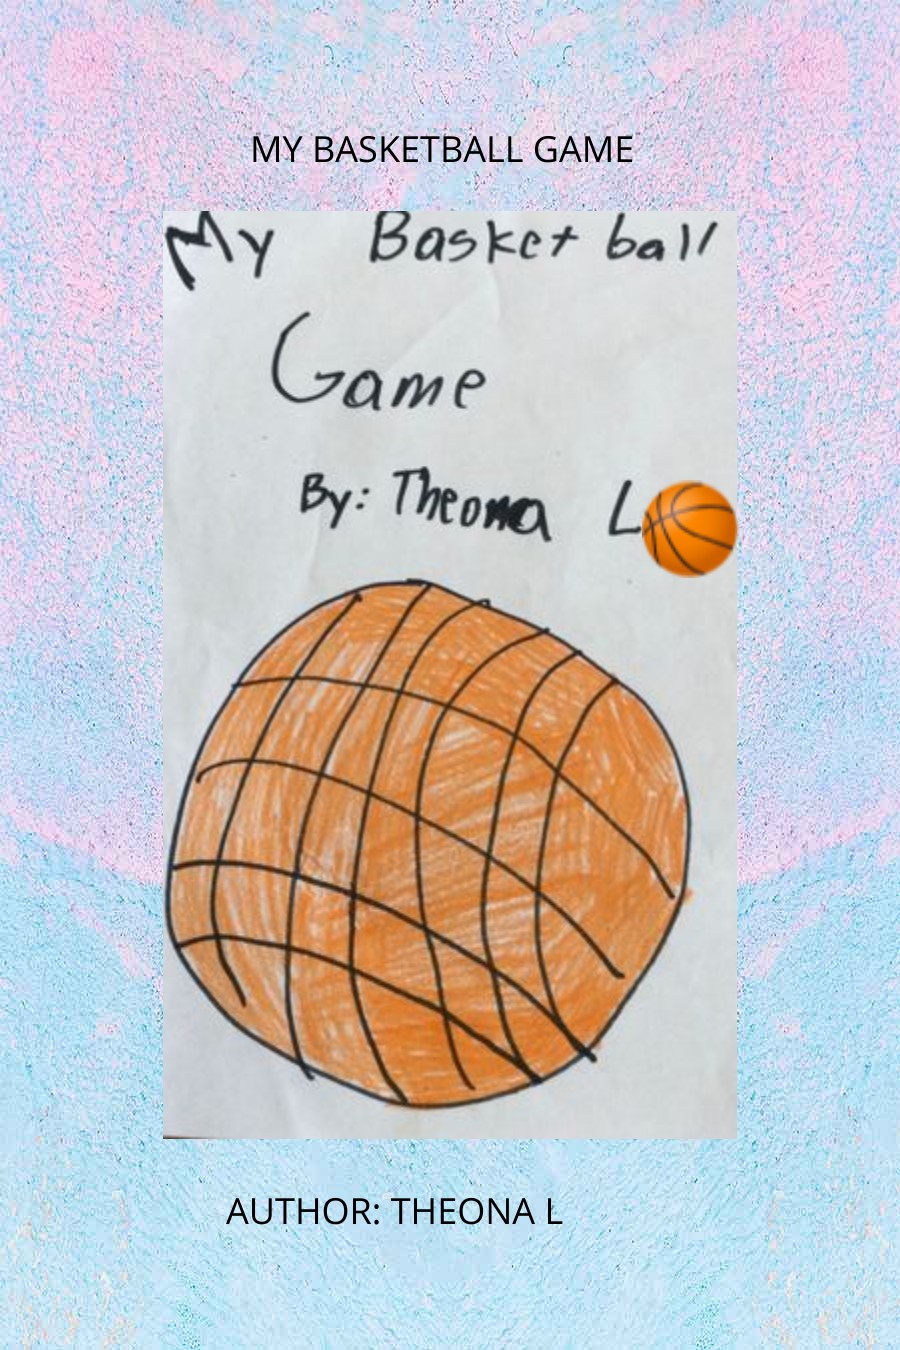 My Basketball Game by Theona L